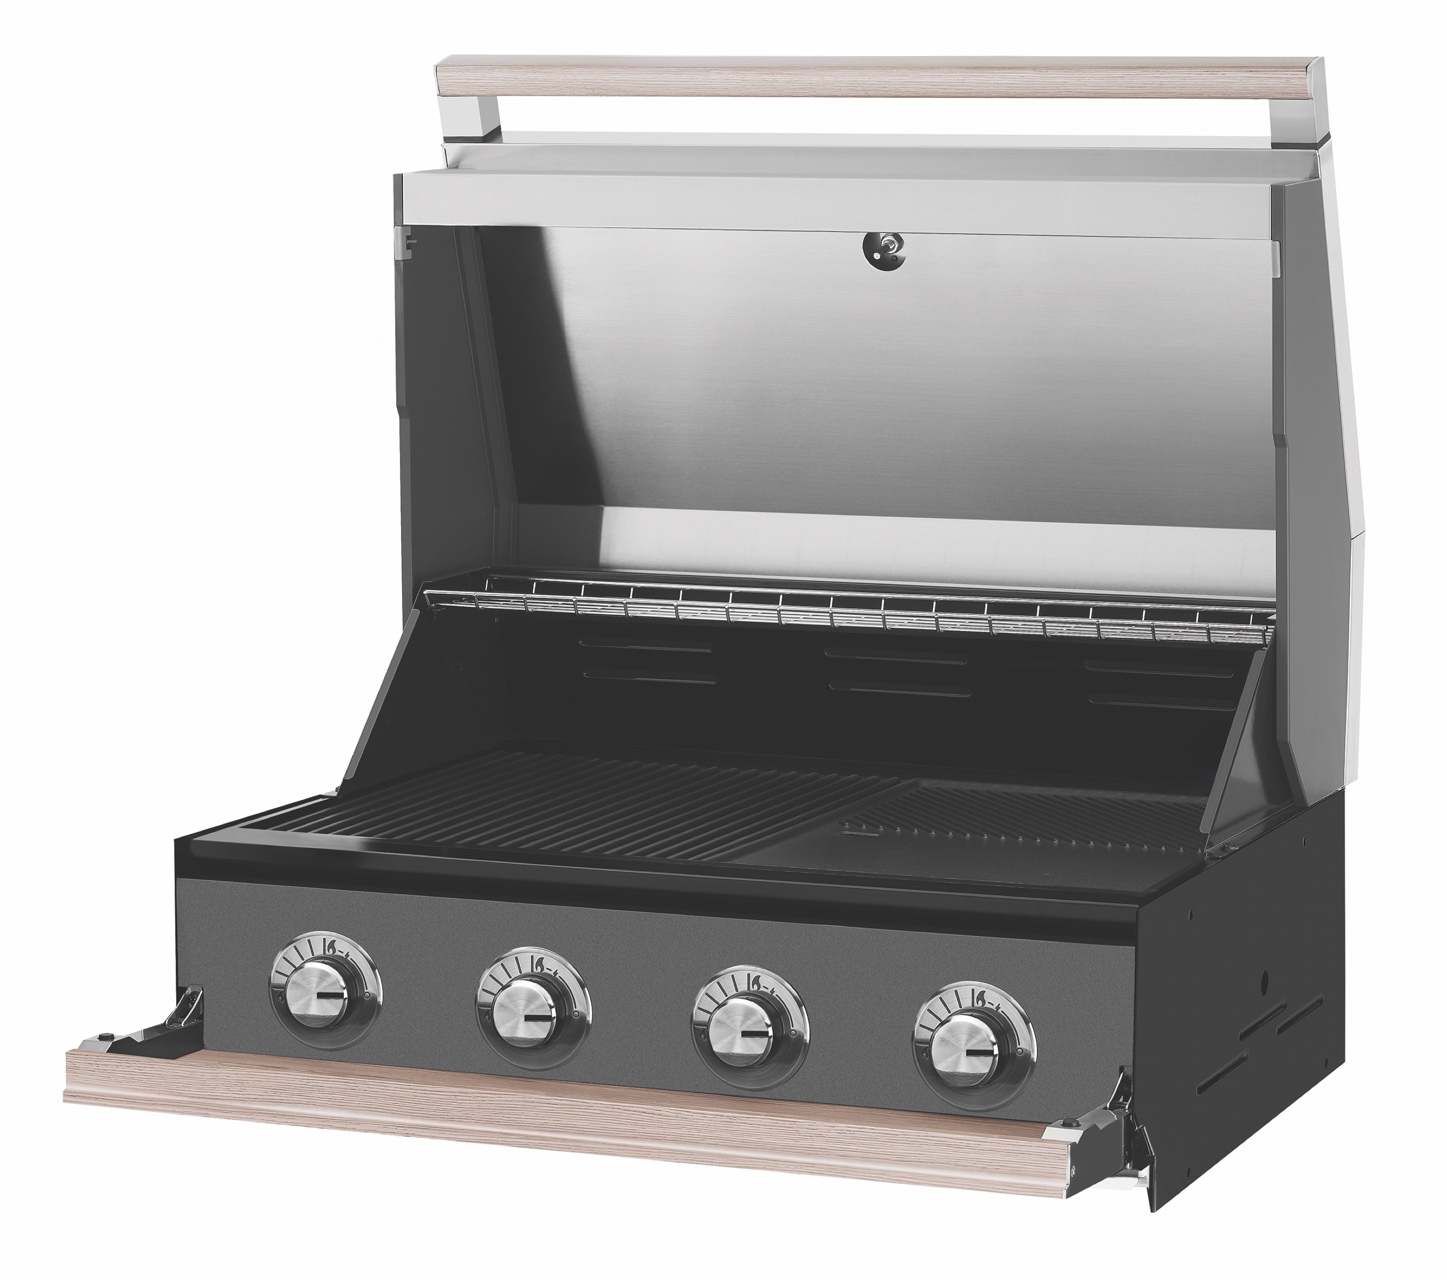 Beefeater 1500 Series - 4 burner built-in grill, b